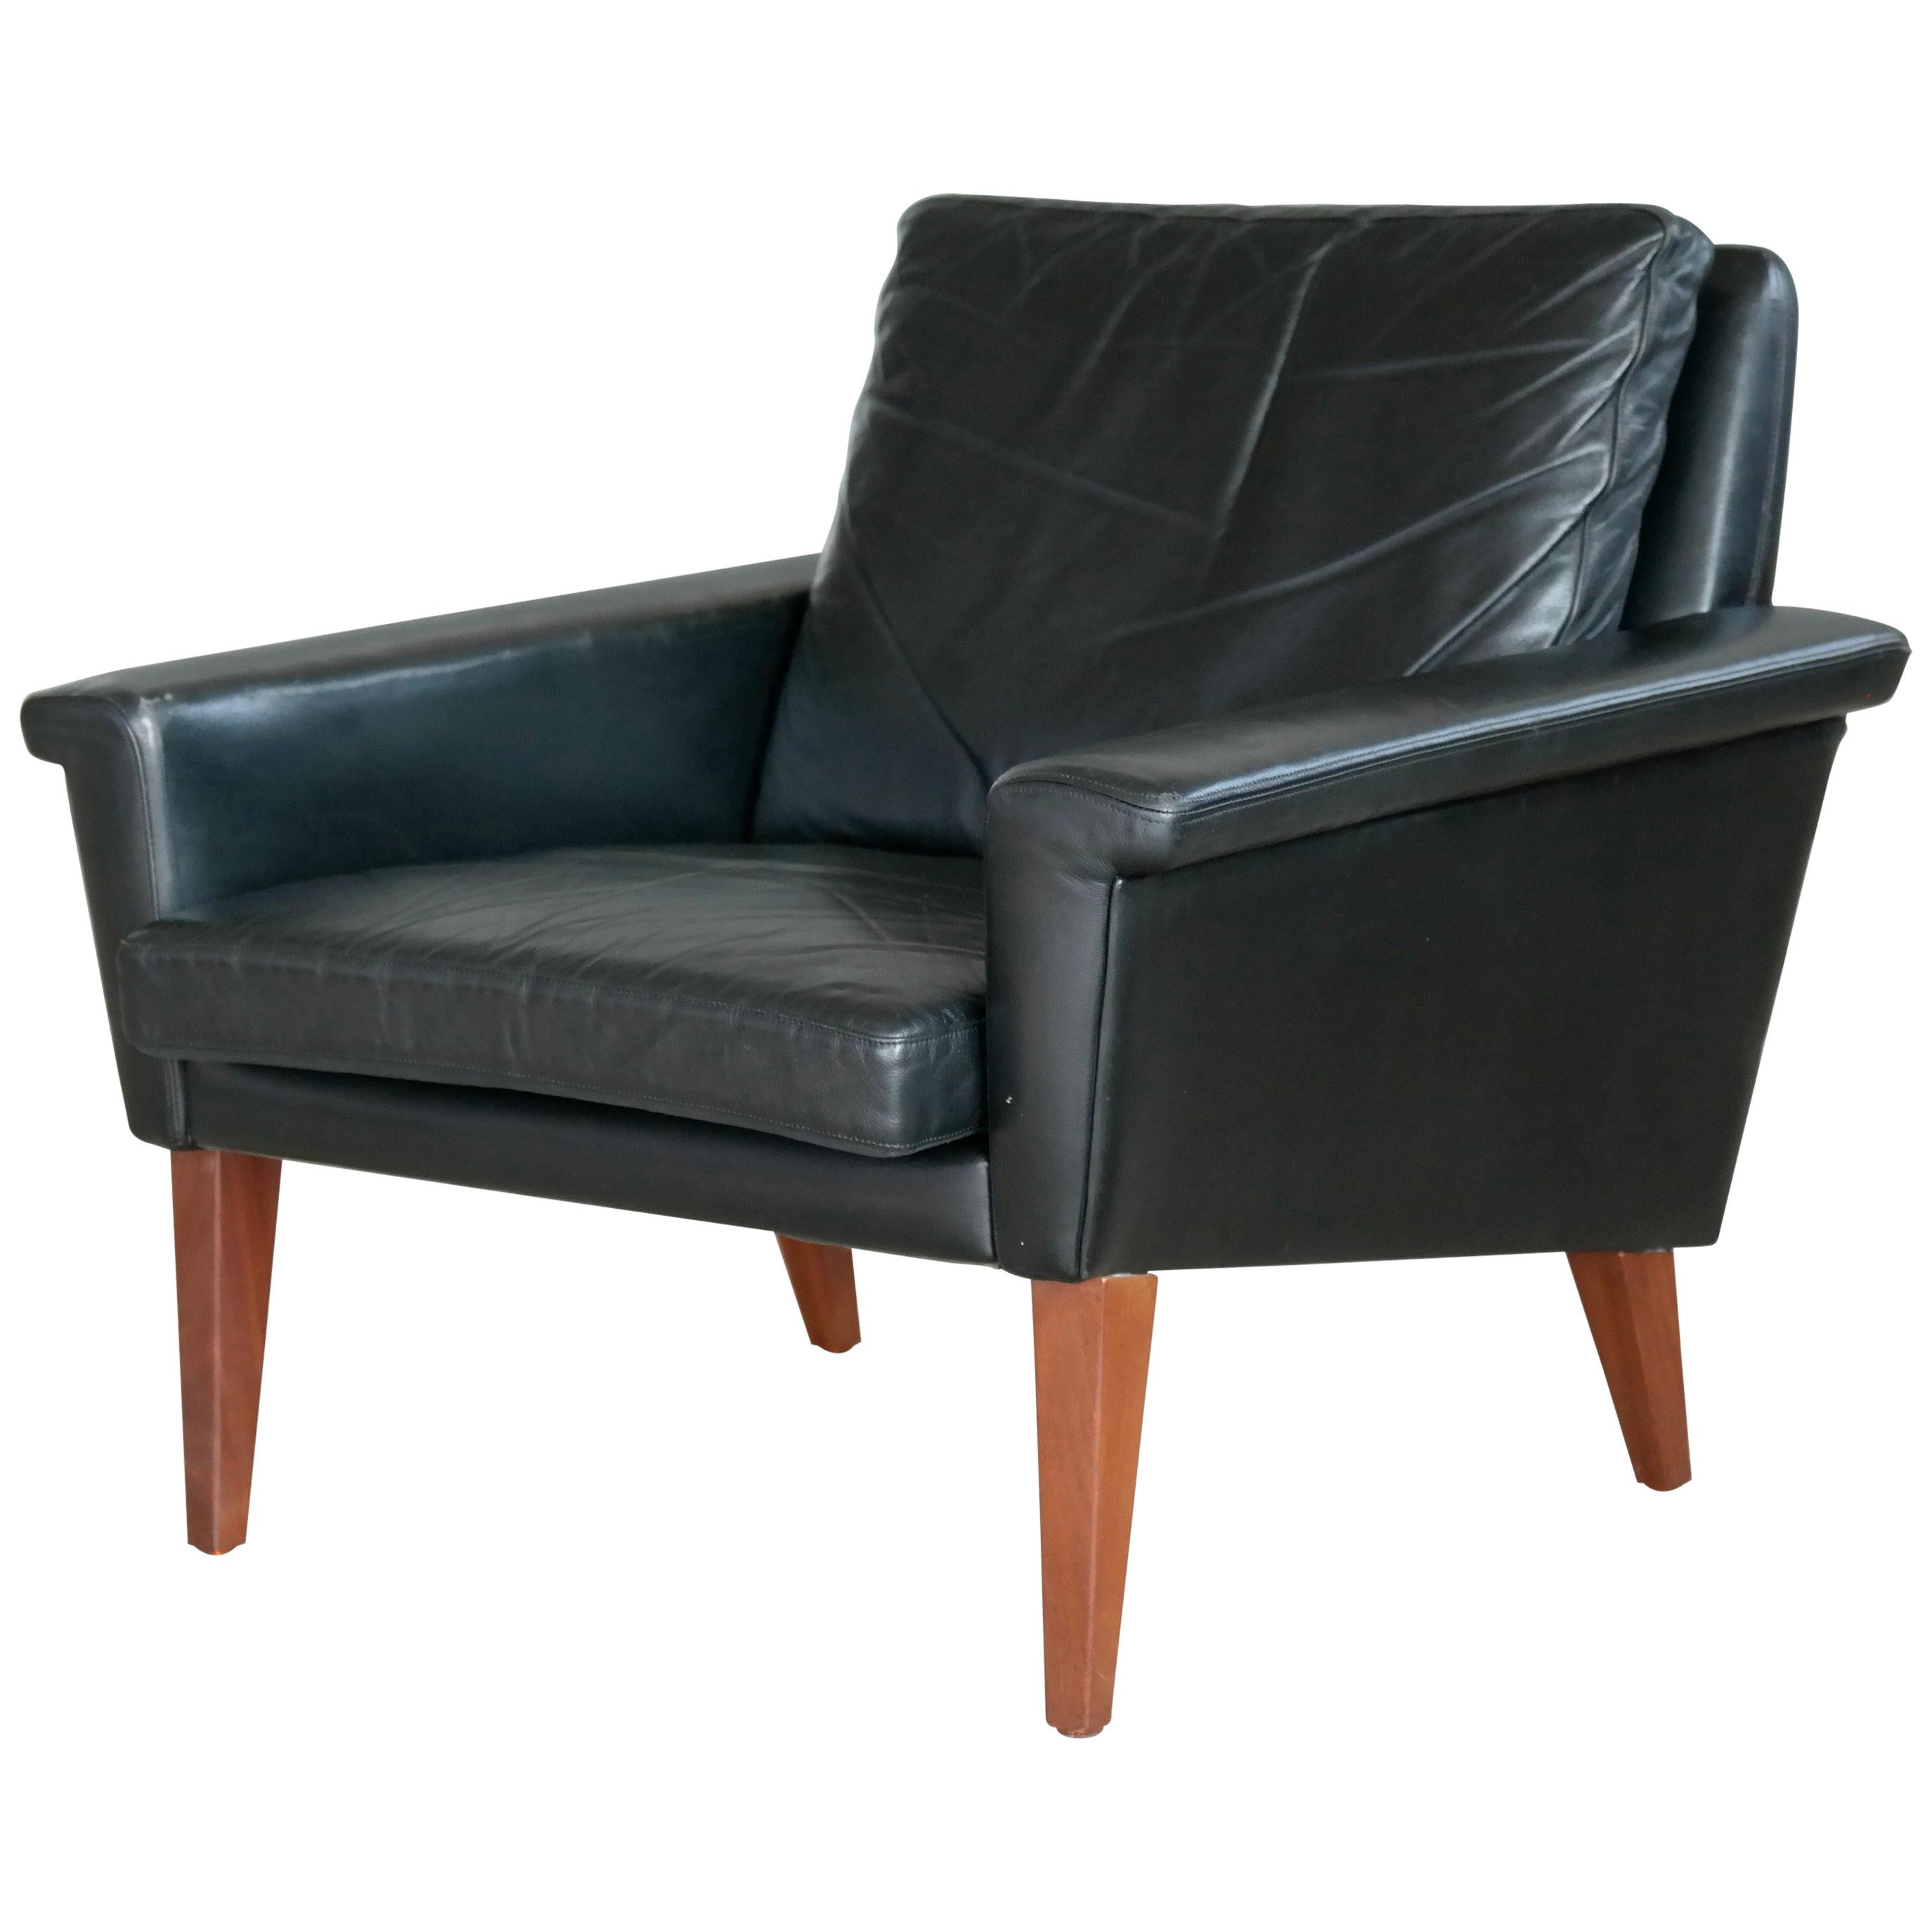 Danish Modern Easy Chair in Leather Attributed to Folke Jansson